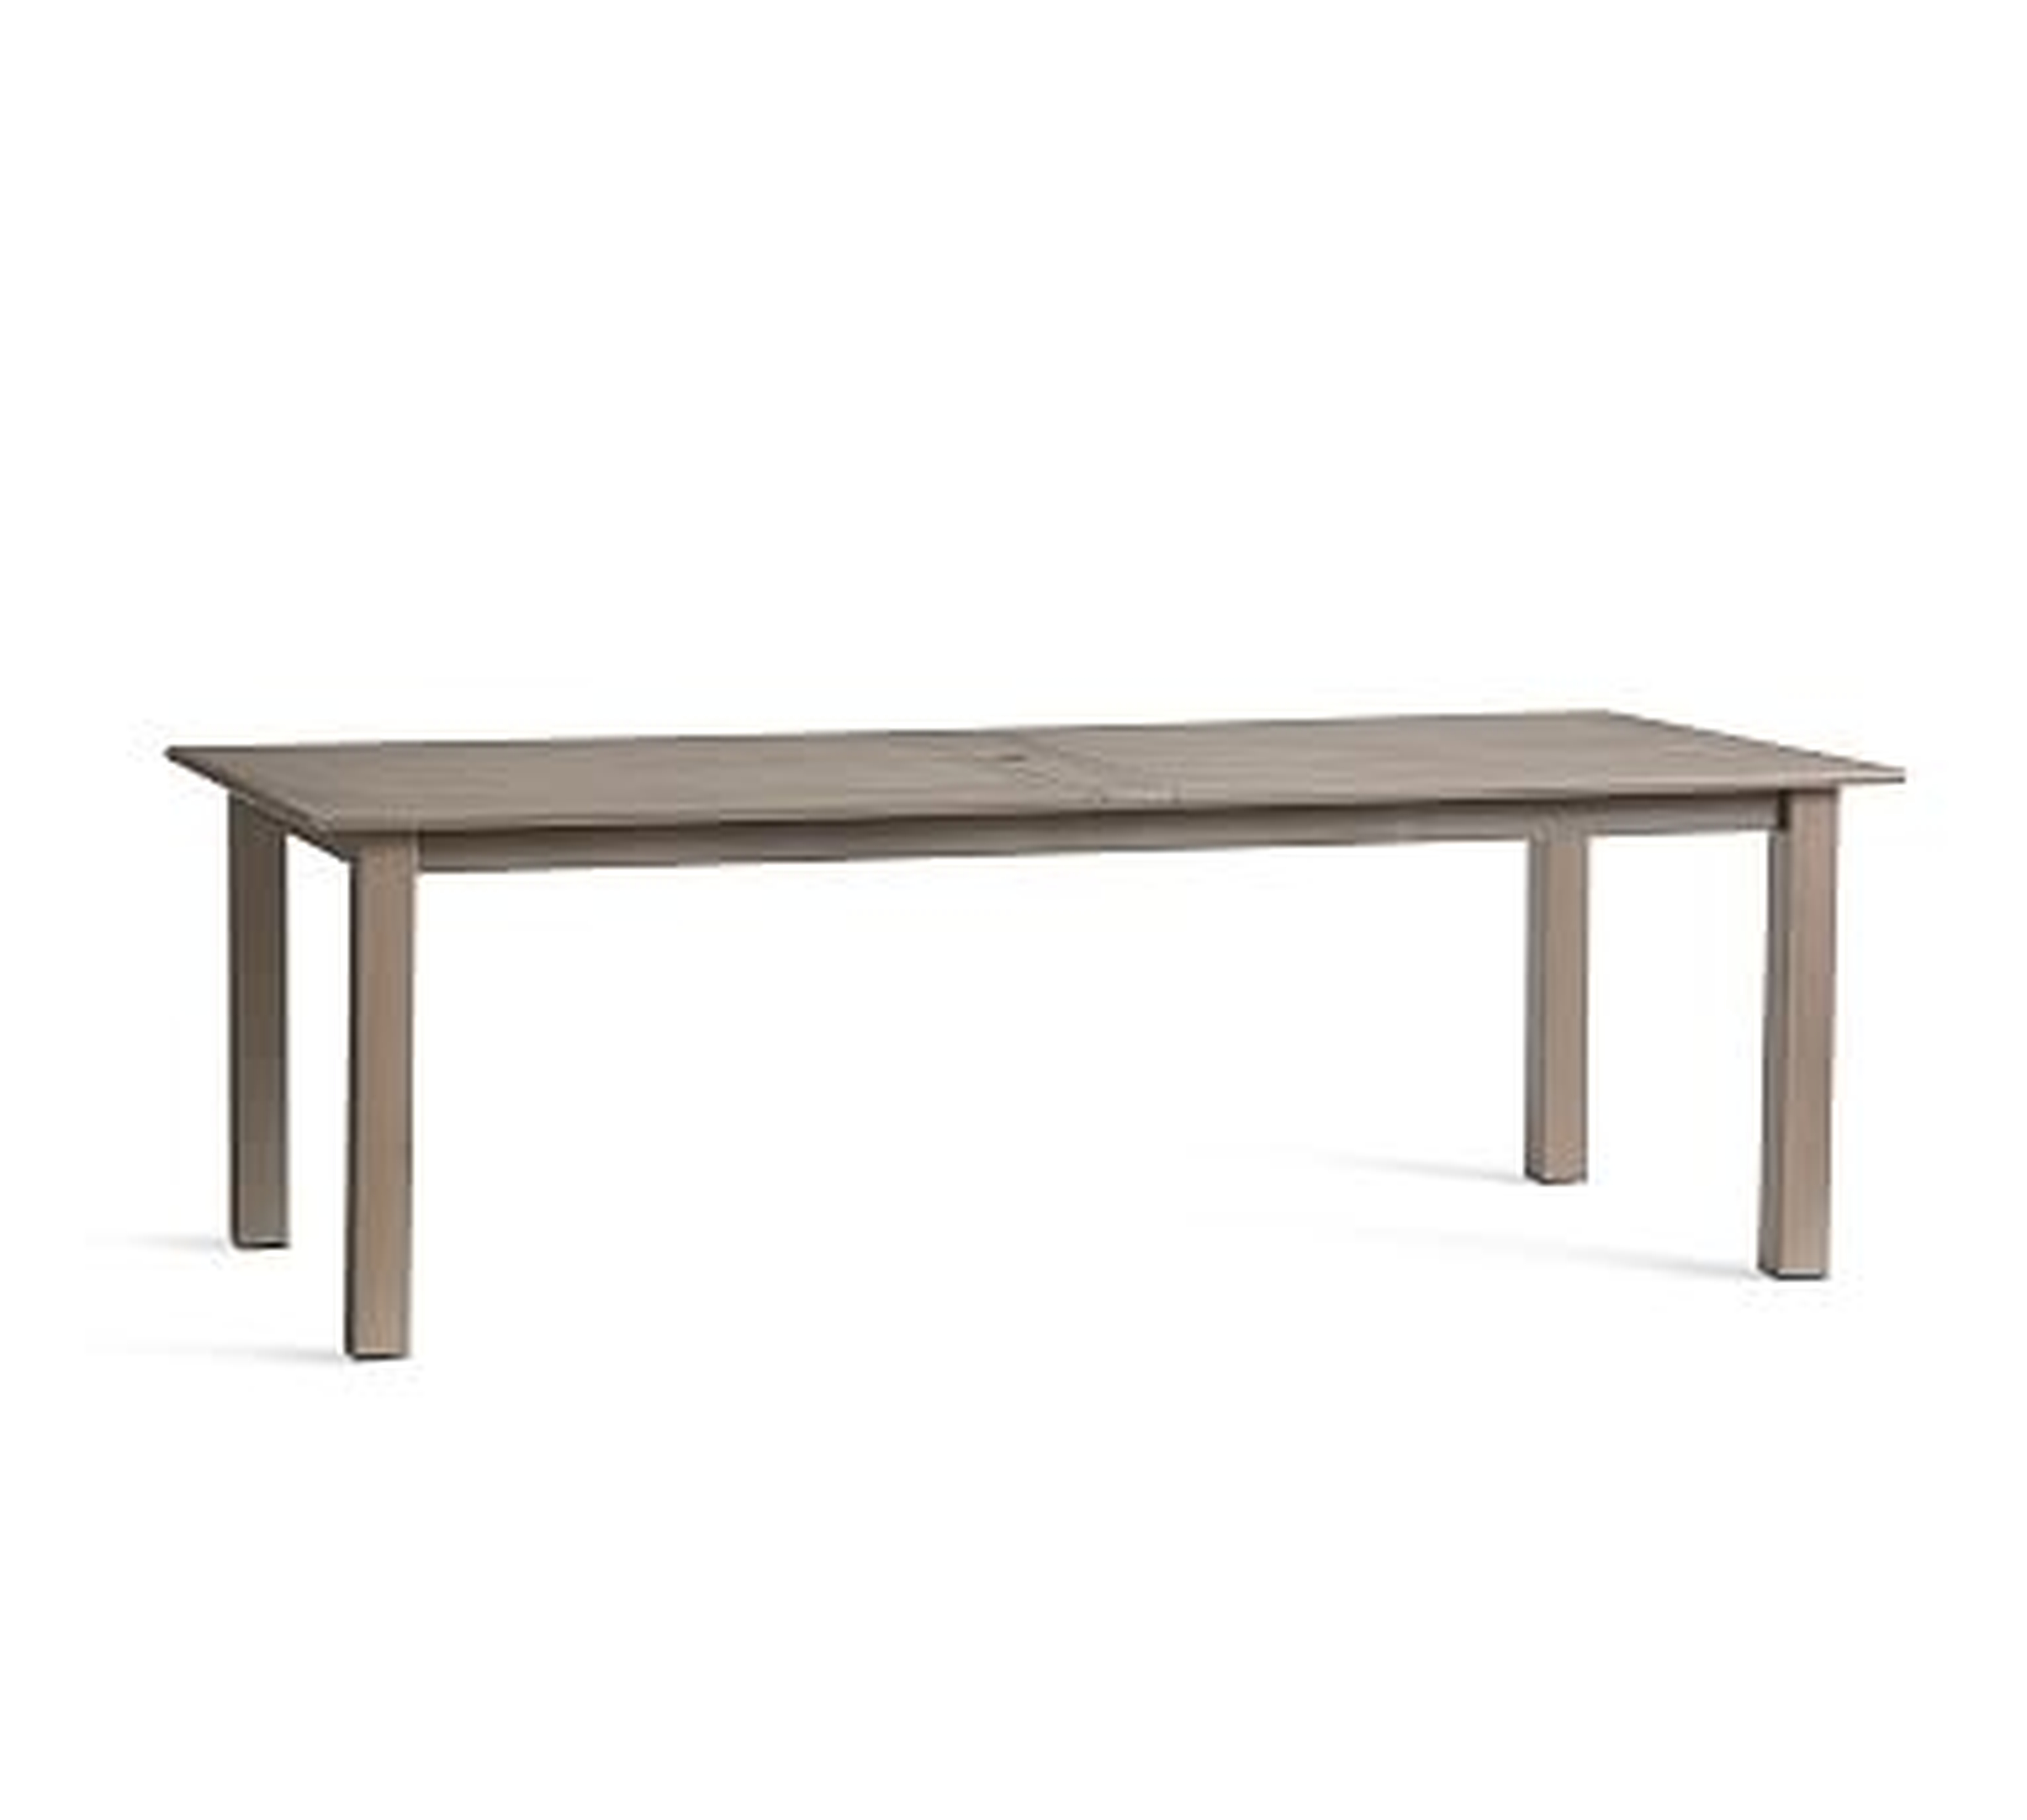 Chatham Rectangular X-Large Extending Dining Table, Gray - Pottery Barn